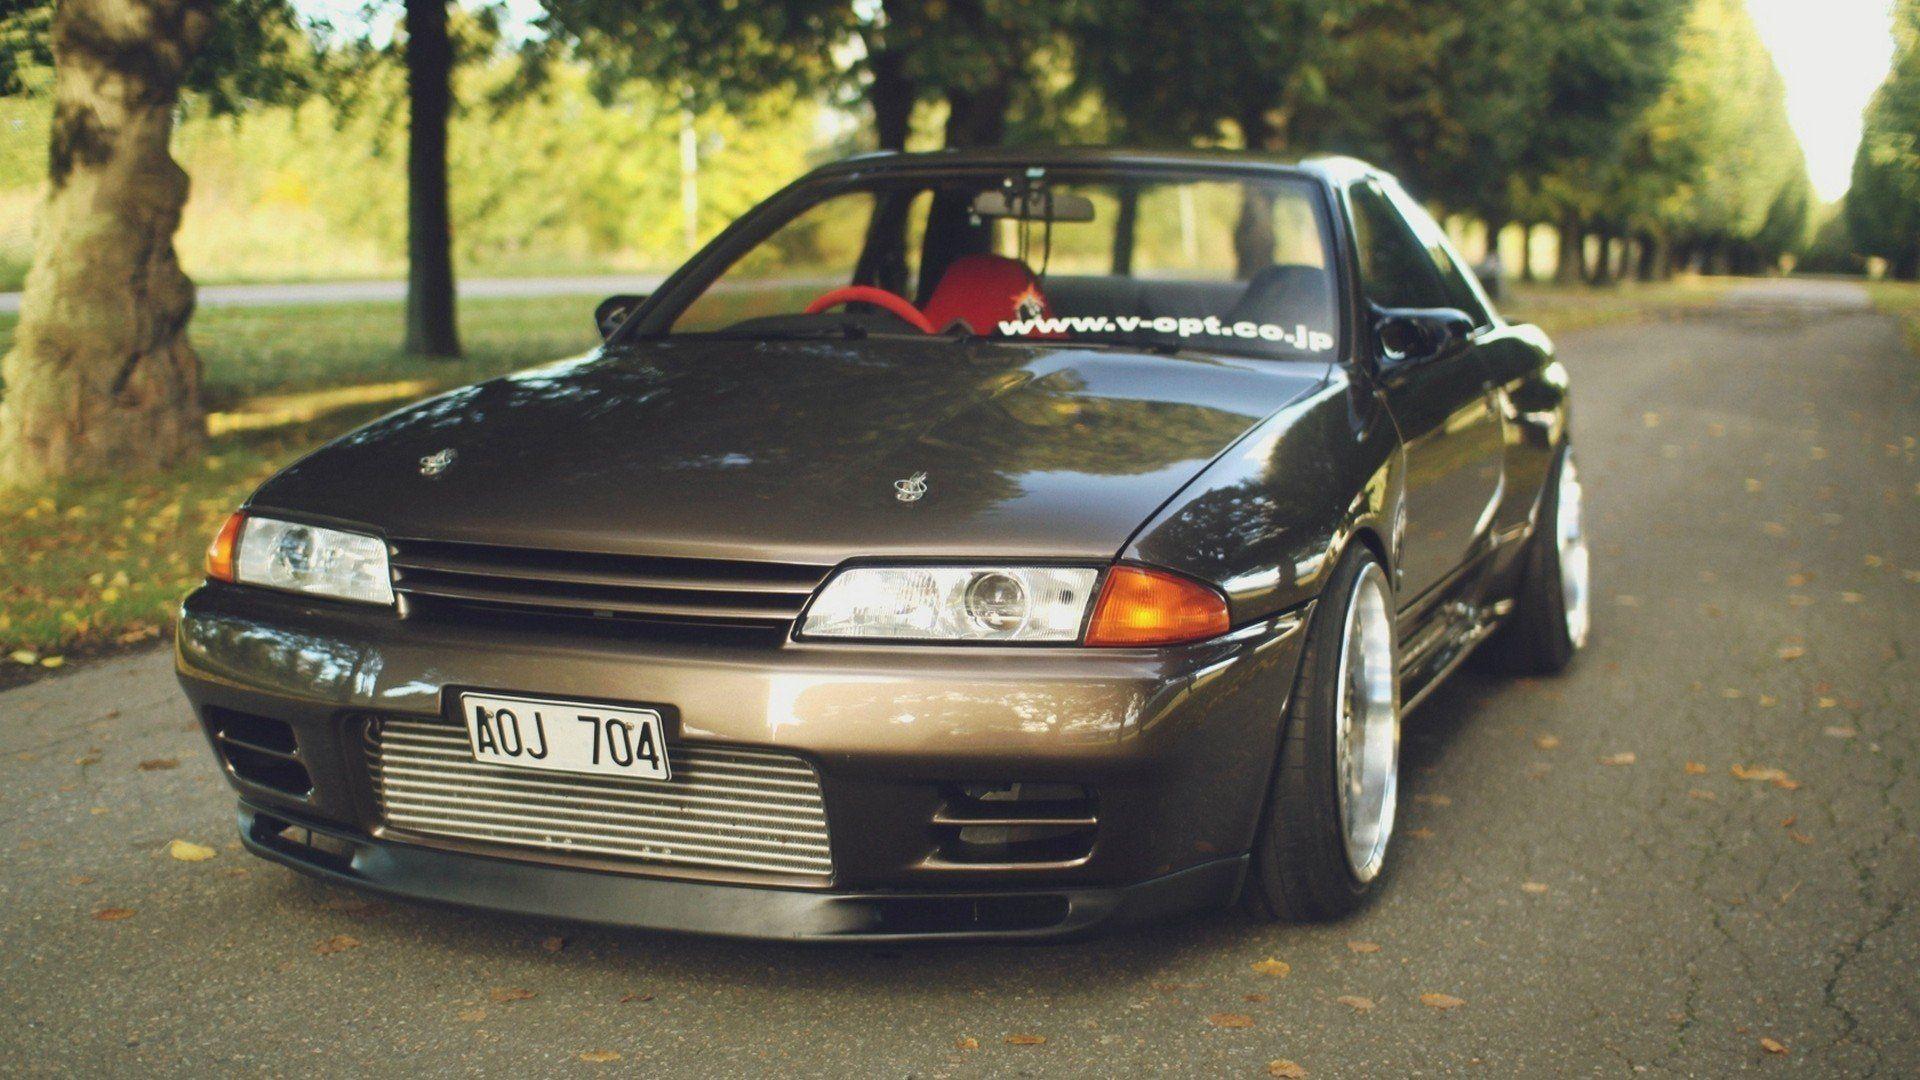 Skyline R32 Wallpapers Wallpaper Cave